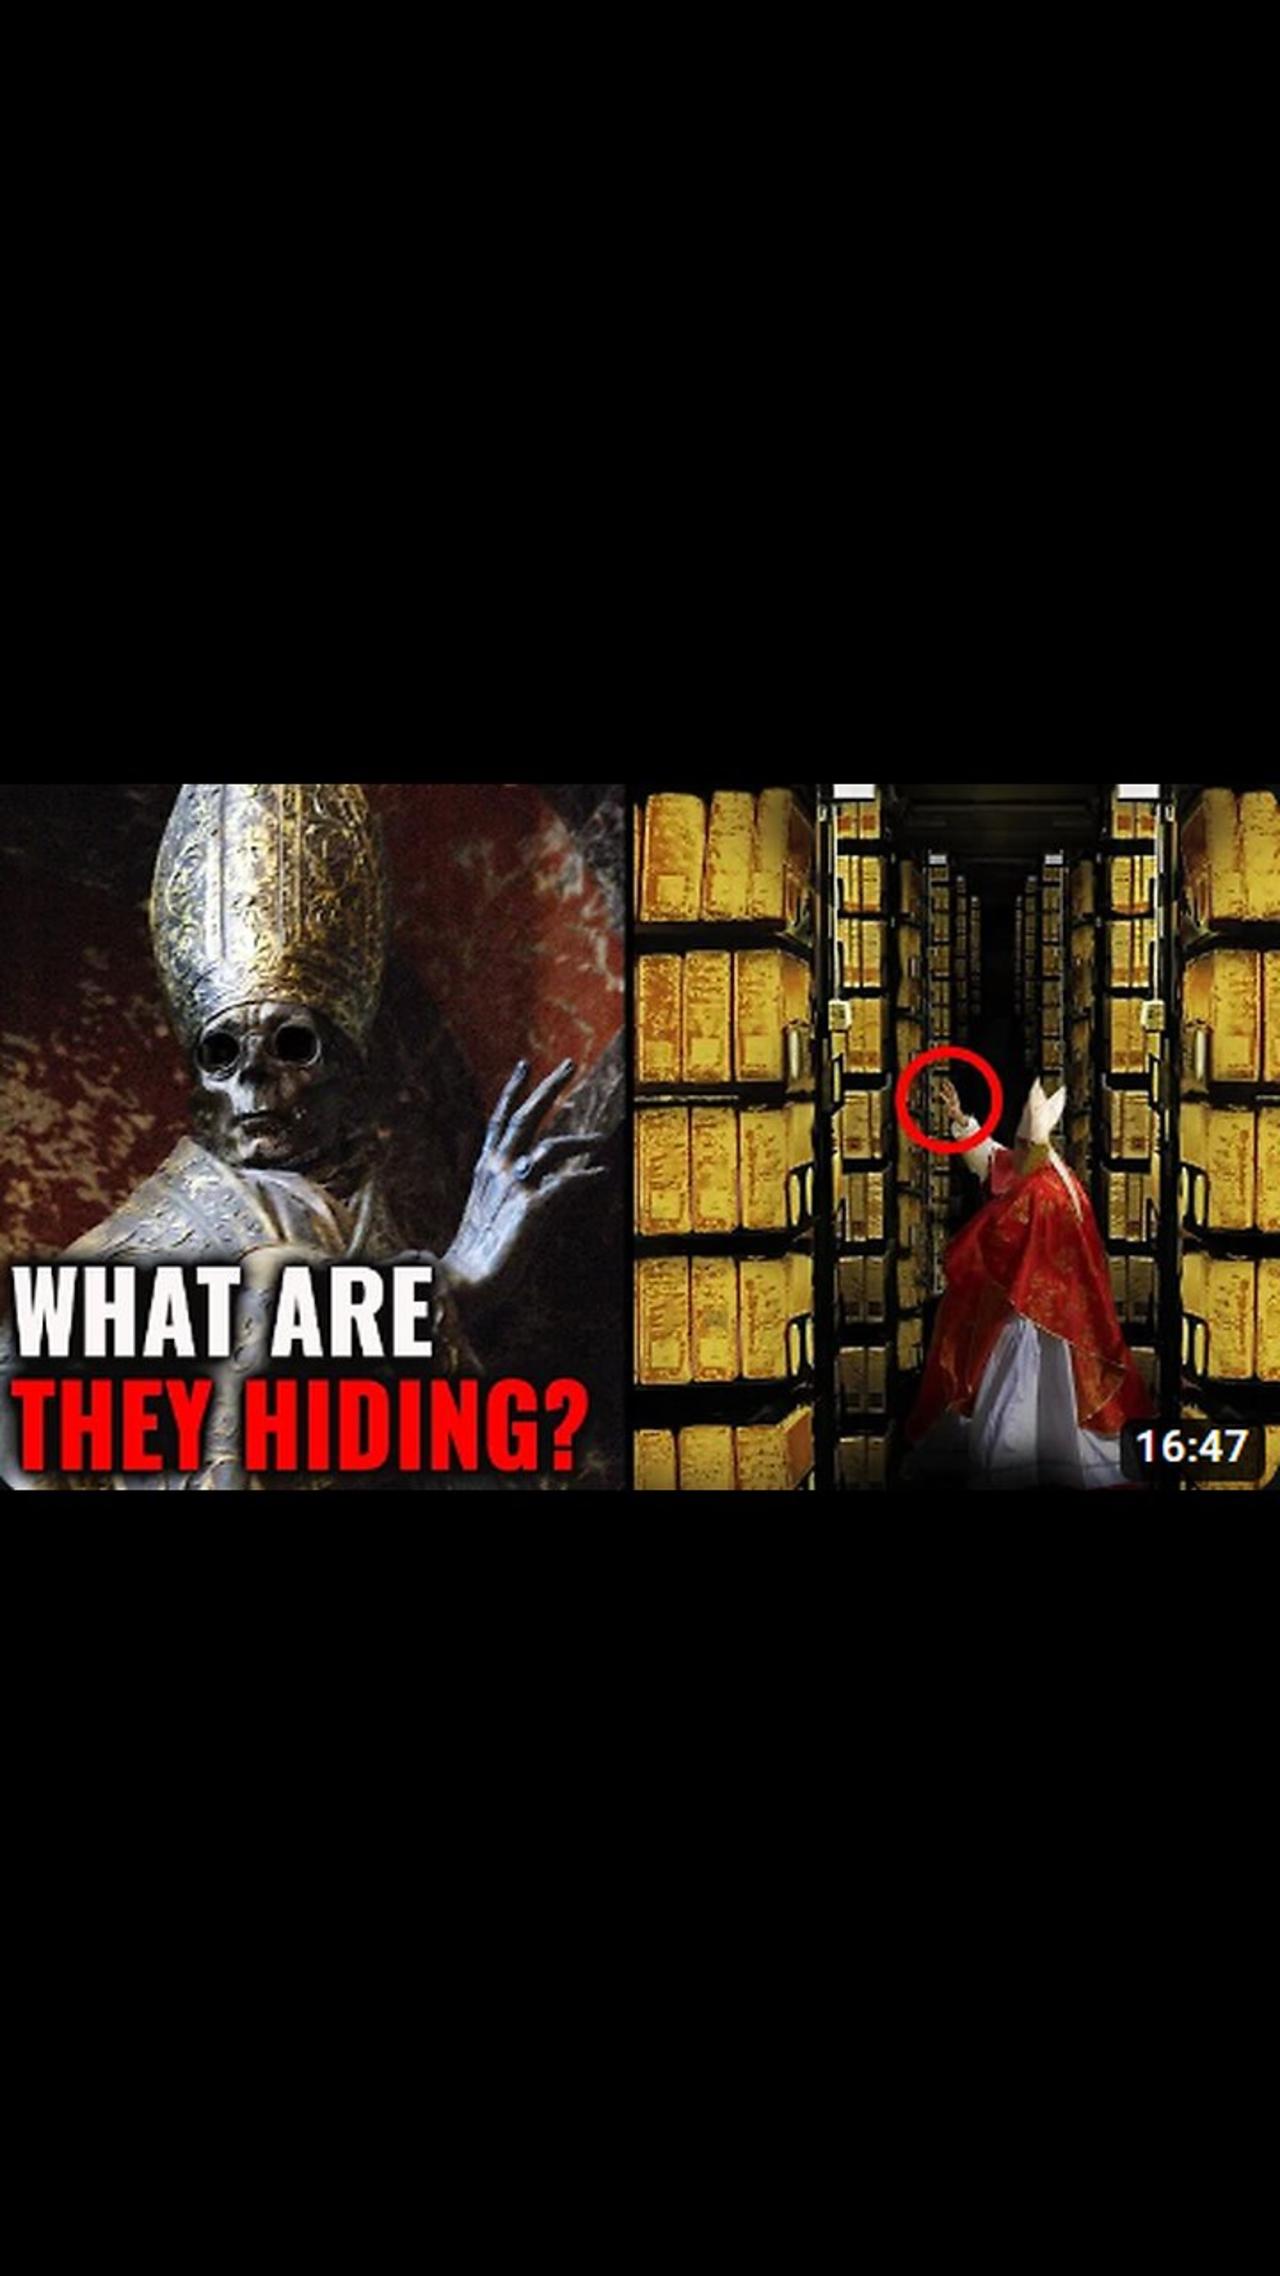 Dark SECRETS of the VATICAN Hidden from Us for THOUSANDS of Years